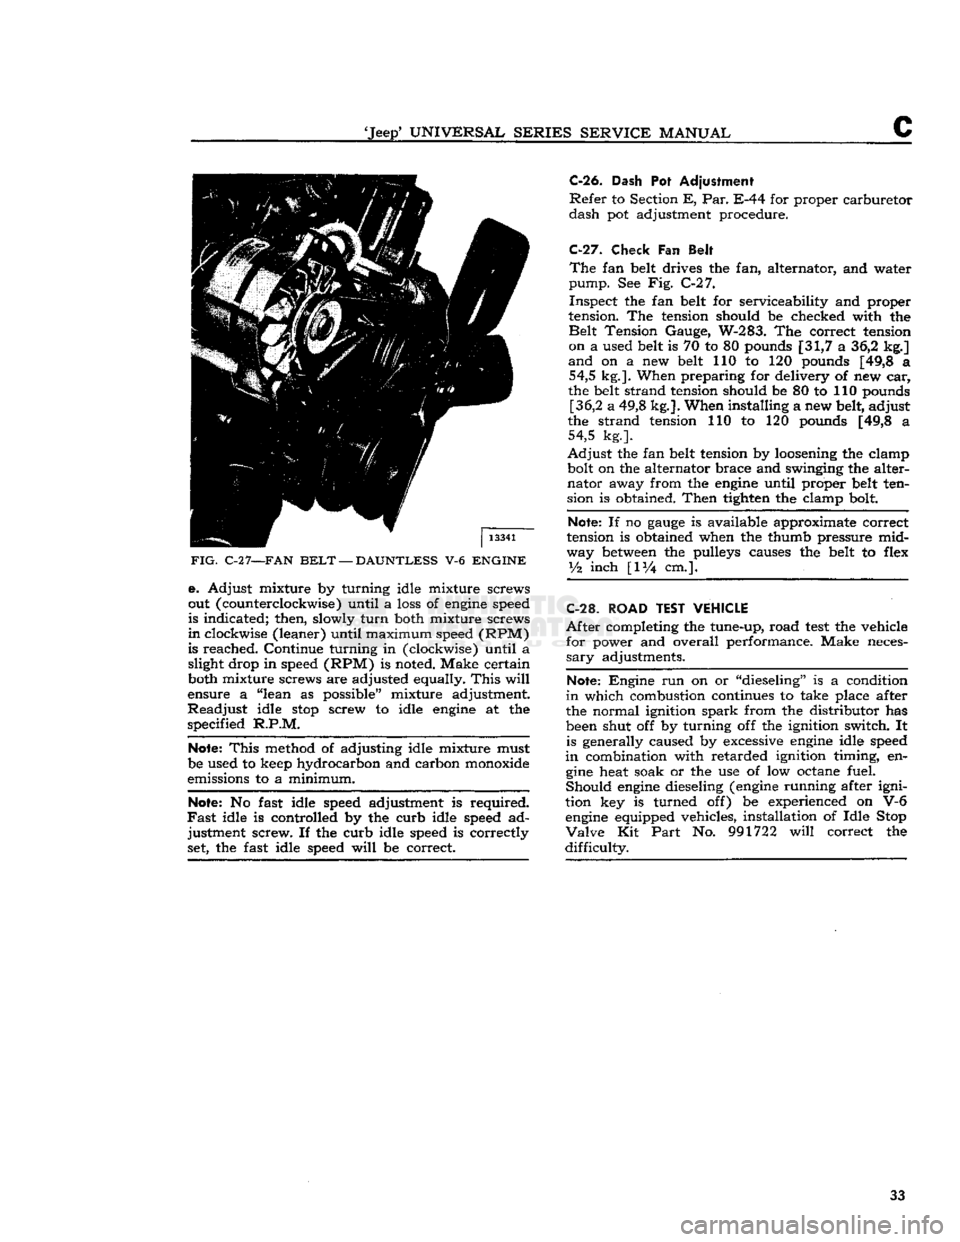 JEEP CJ 1953 Owners Guide 
Jeep*
 UNIVERSAL
 SERIES
 SERVICE
 MANUAL 

C 

FIG.
 C-2
 7—FAN
 BELT
 —
 DAUNTLESS
 V-6
 ENGINE 
 e. Adjust mixture by turning idle mixture screws 
out (counterclockwise) until a loss of engin